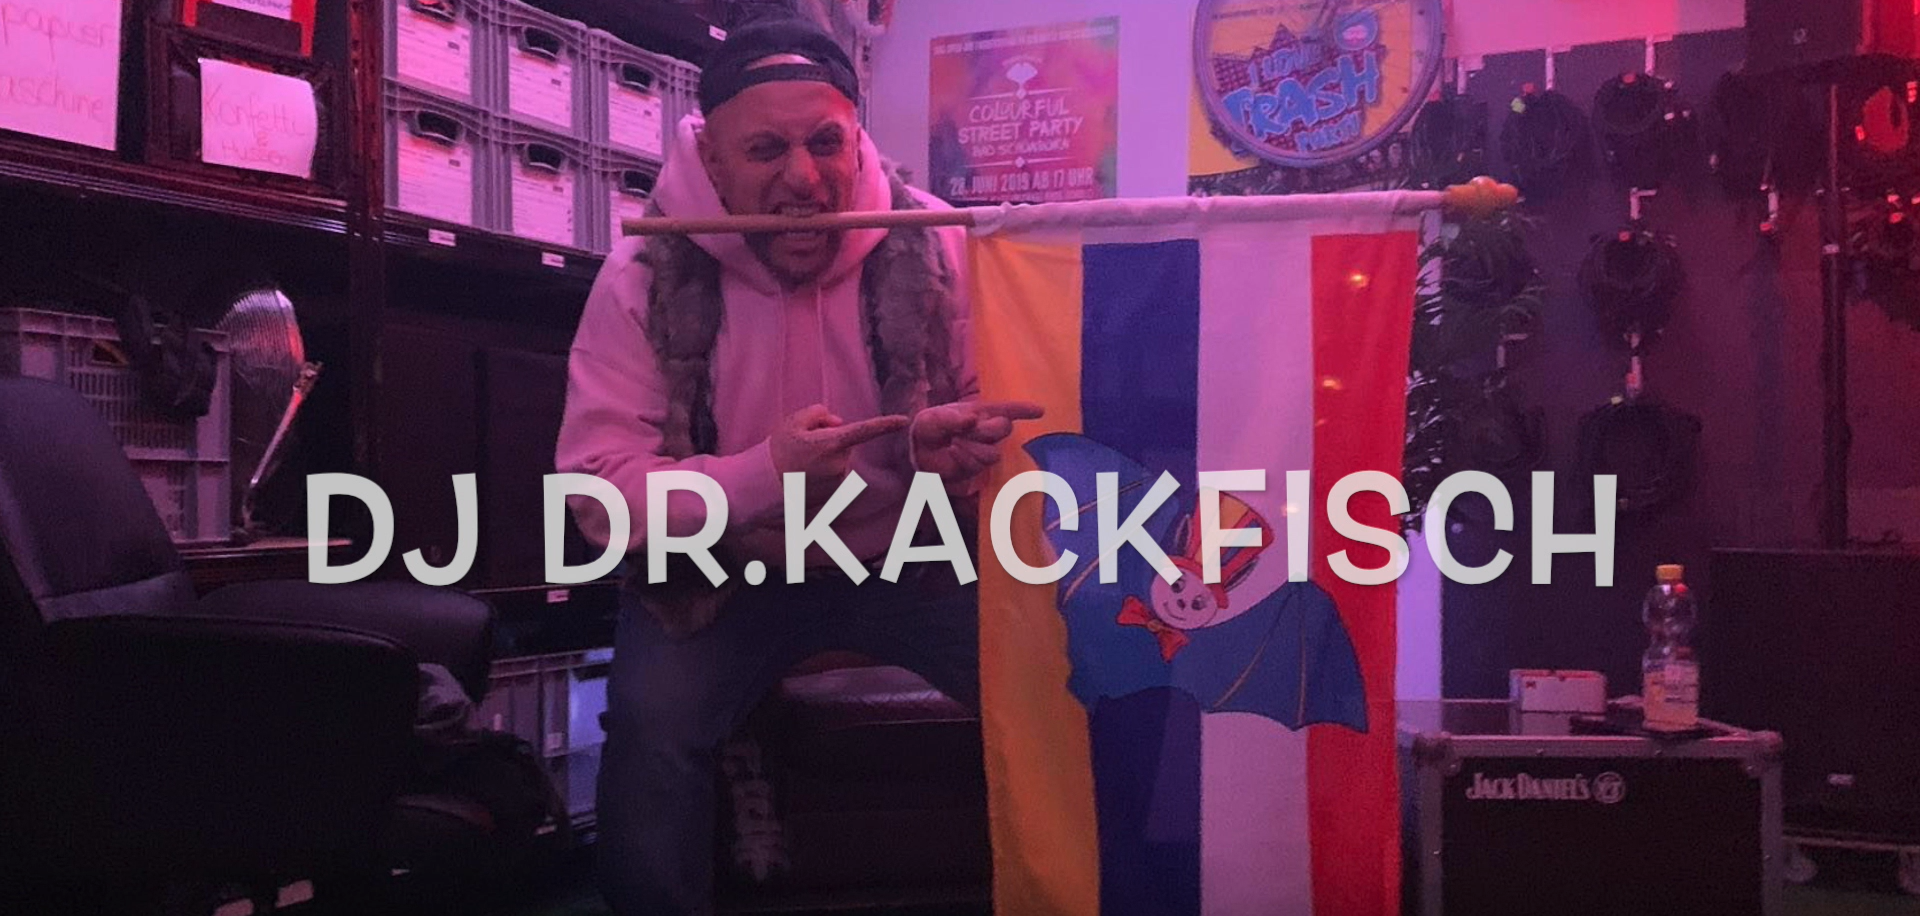 You are currently viewing 06.02.2021: Maskenball 4.0 mit DJ Dr. Kackfisch